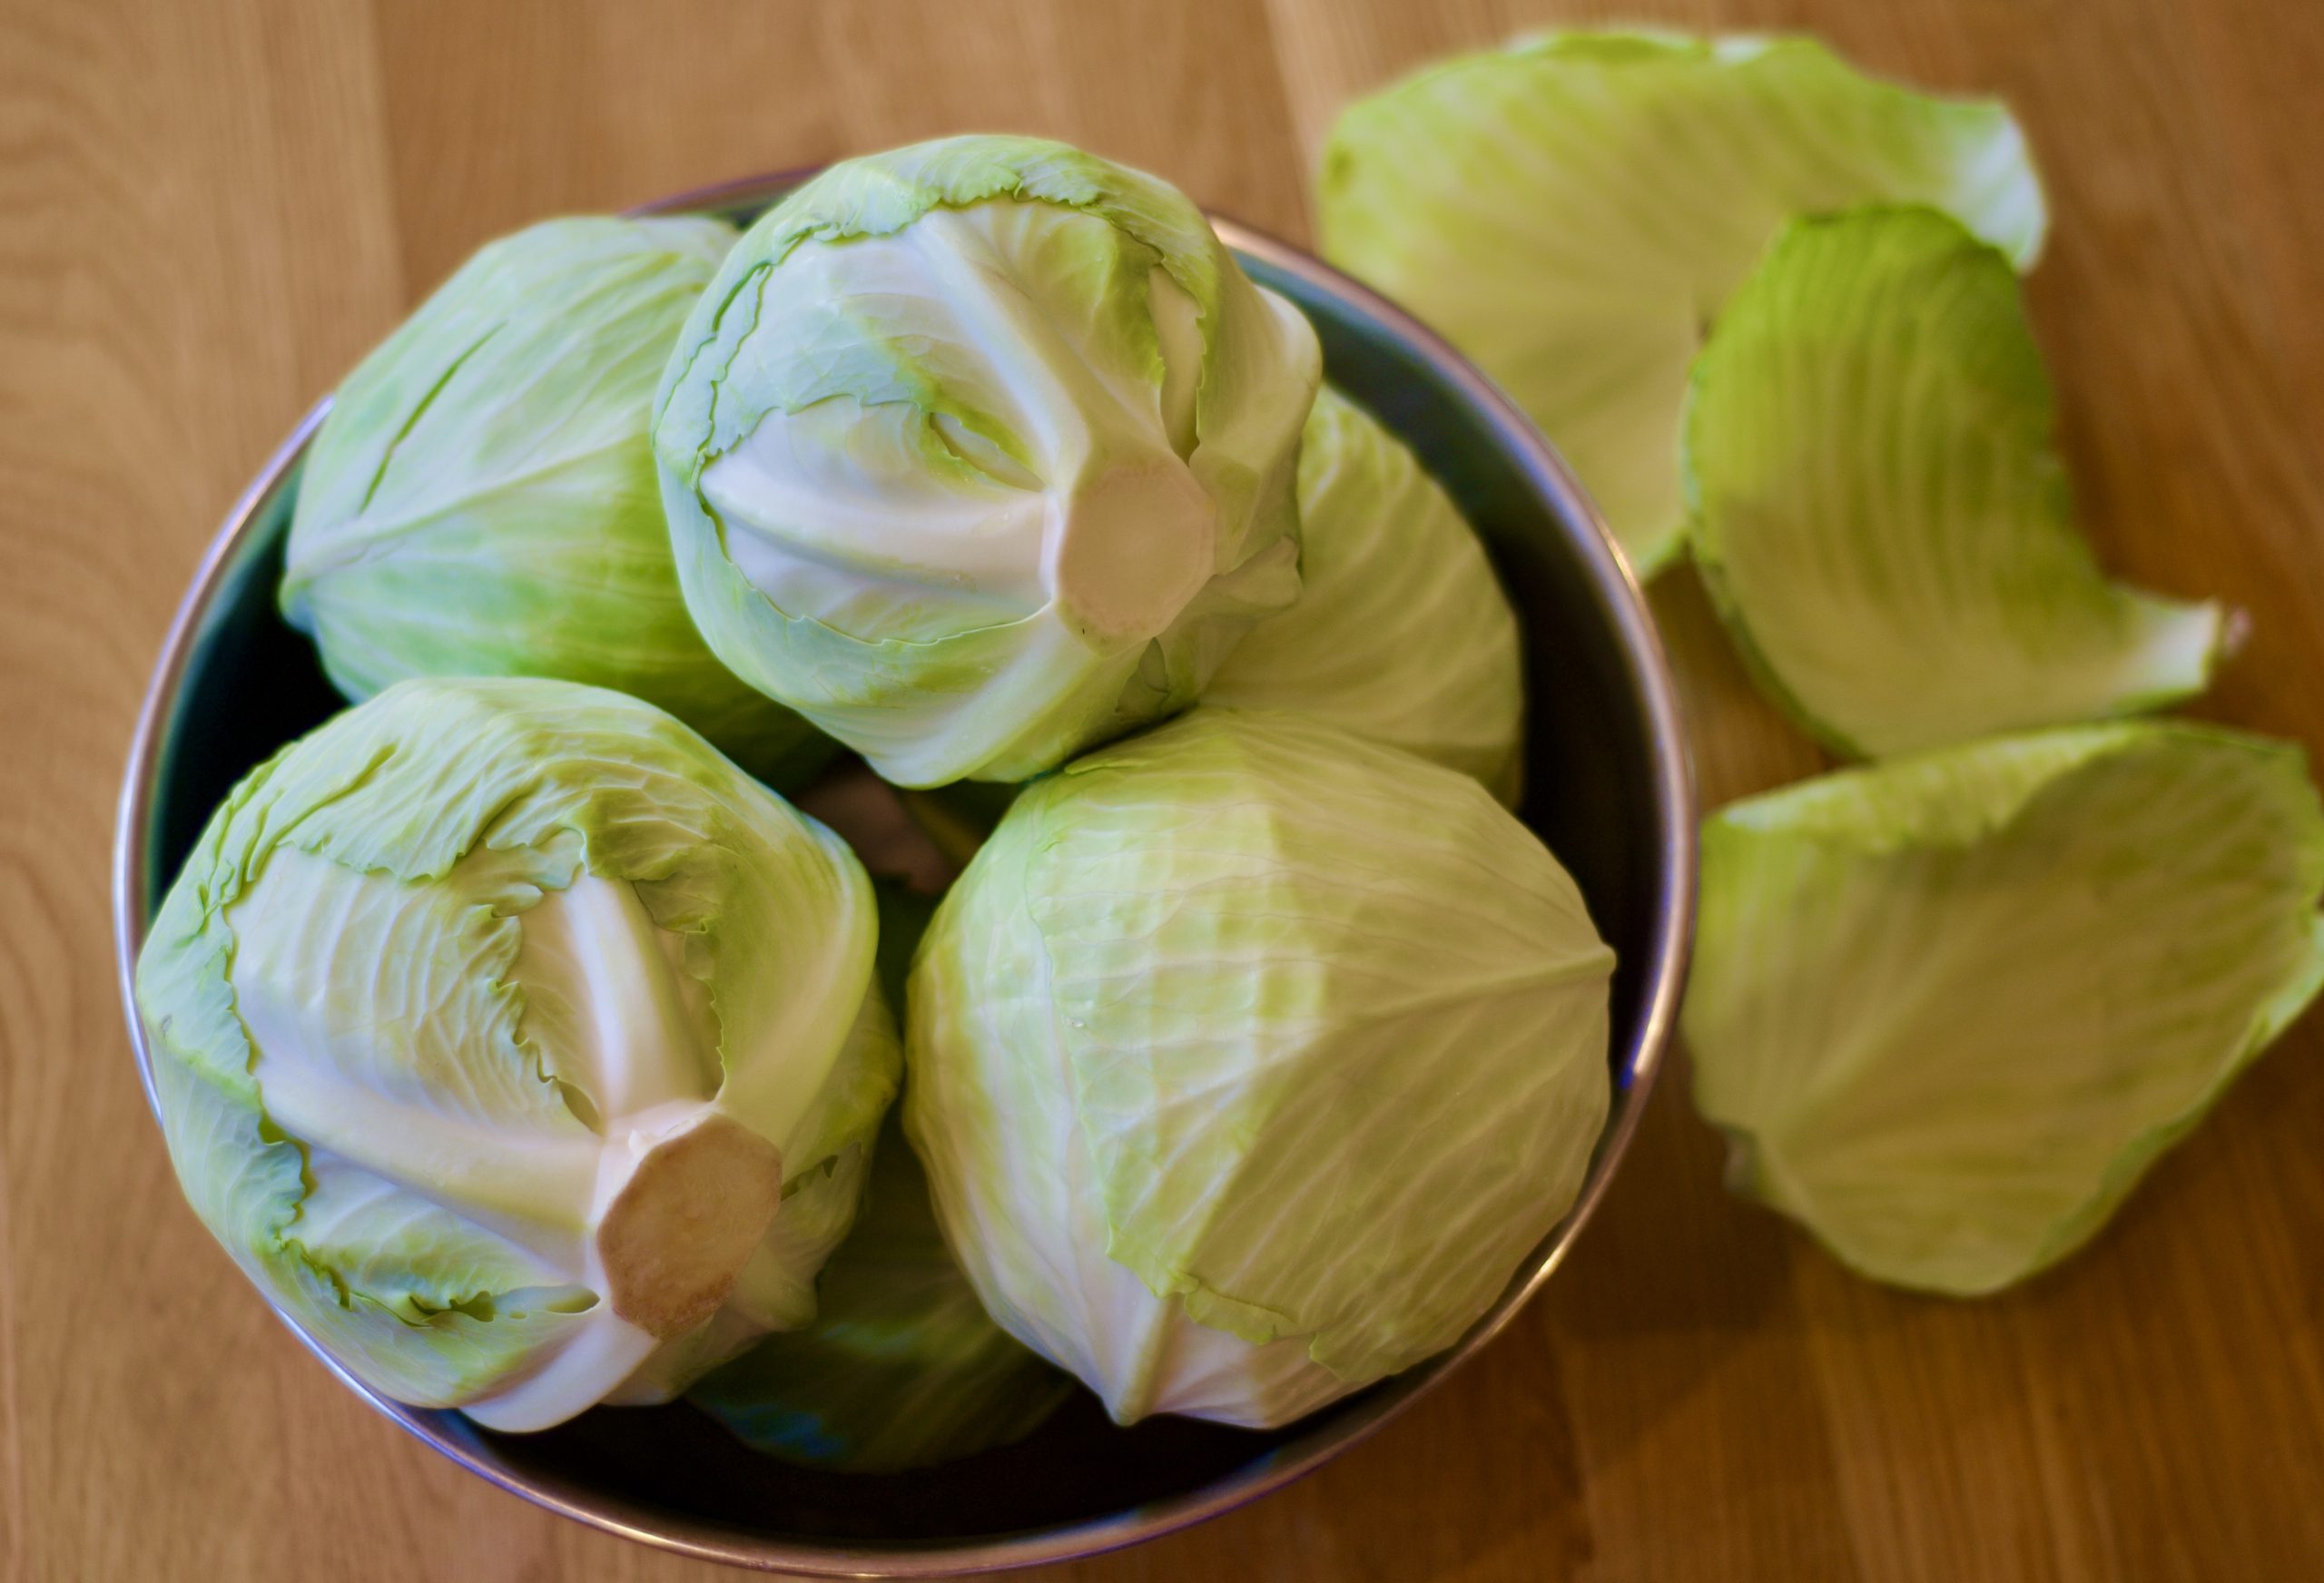 Green Cabbages